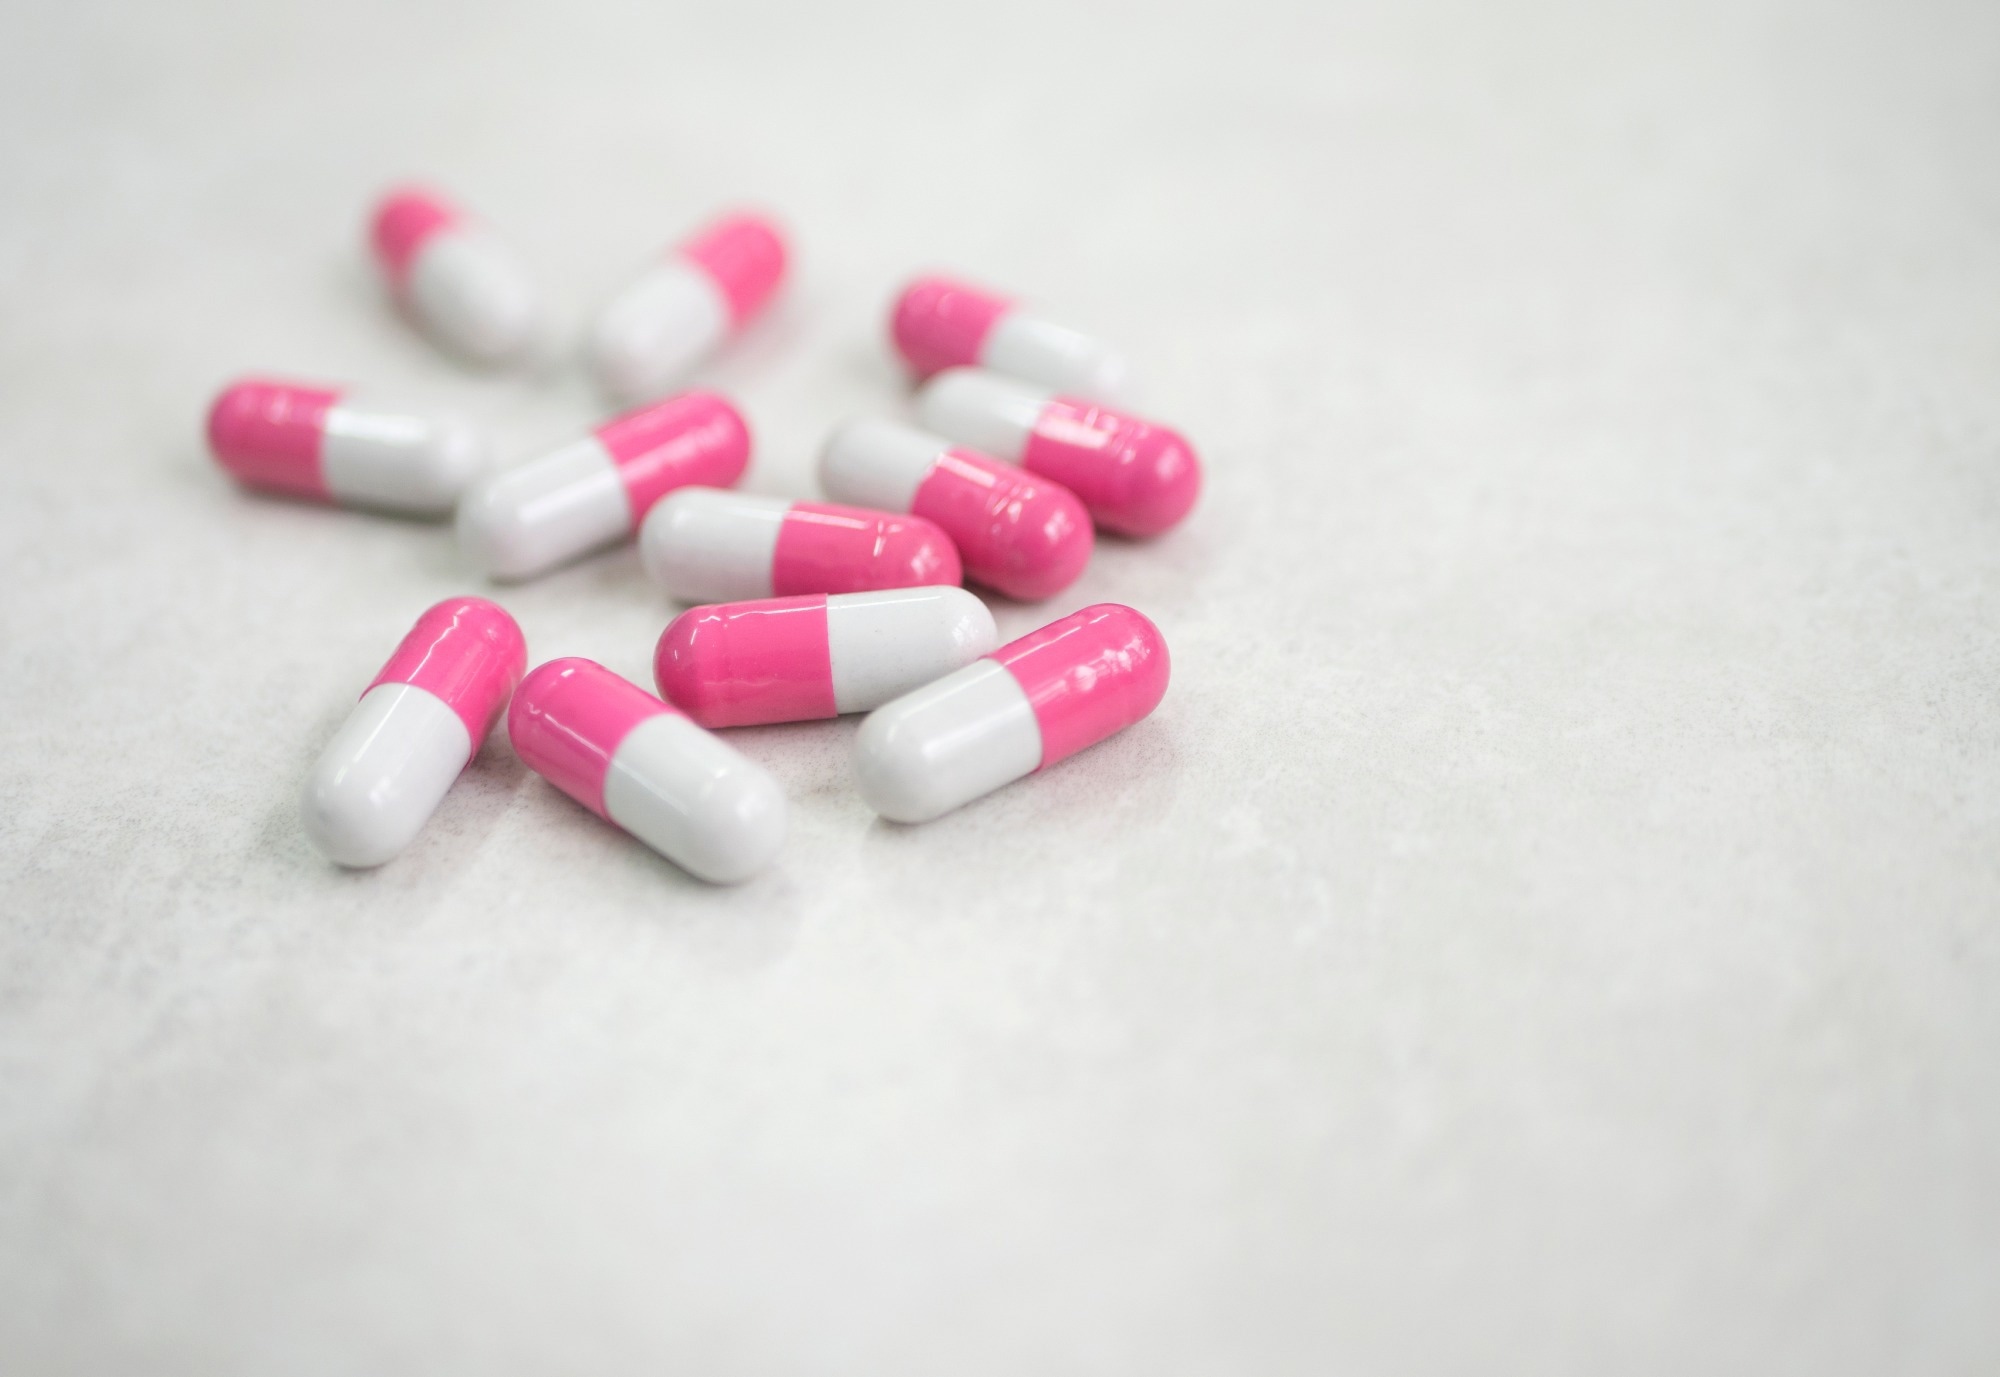 Study: Rates of Antipsychotic Drug Prescribing Among People Living With Dementia During the COVID-19 Pandemic. Image Credit: Tarsellind/Shutterstock